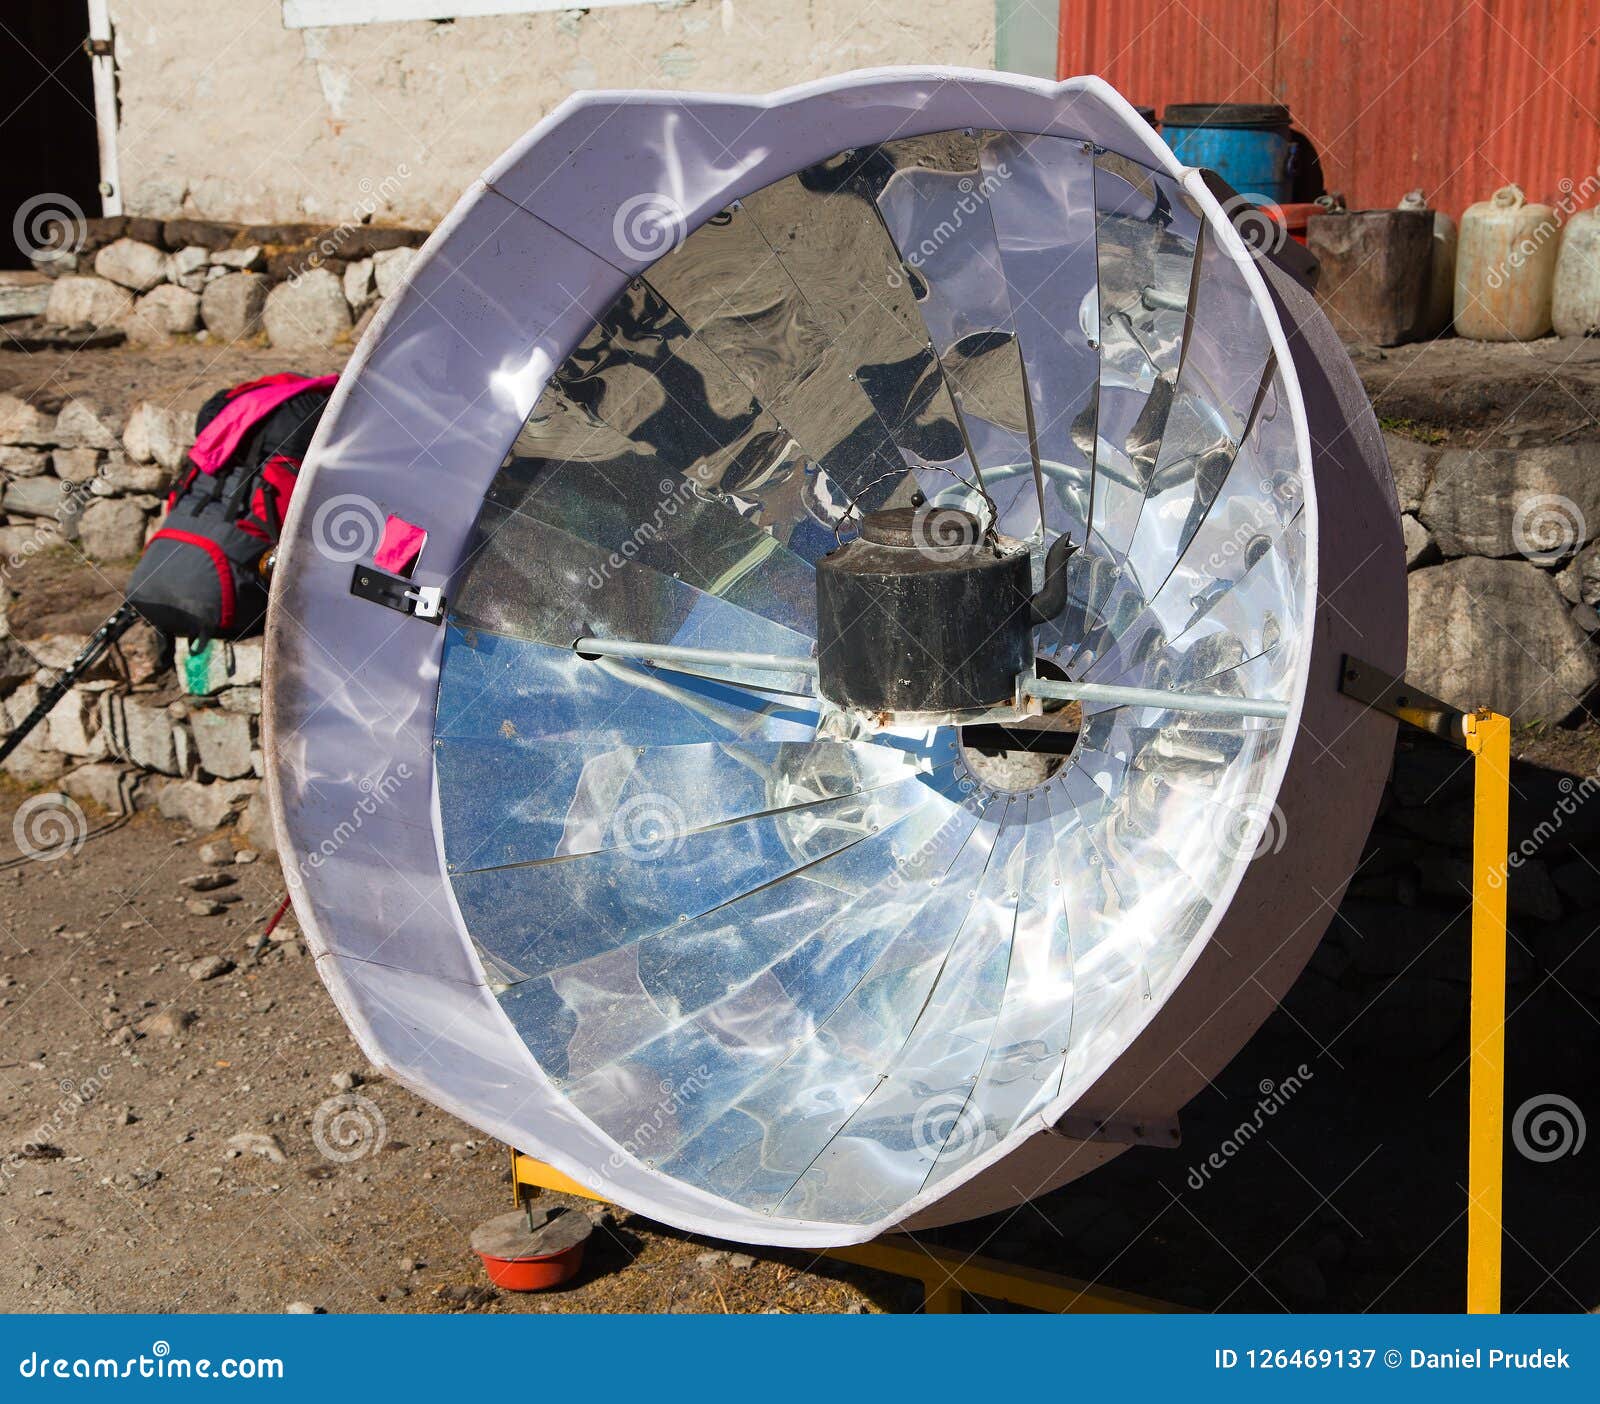 https://thumbs.dreamstime.com/z/sunny-solar-cooker-everest-area-nepal-view-ecology-cooking-126469137.jpg